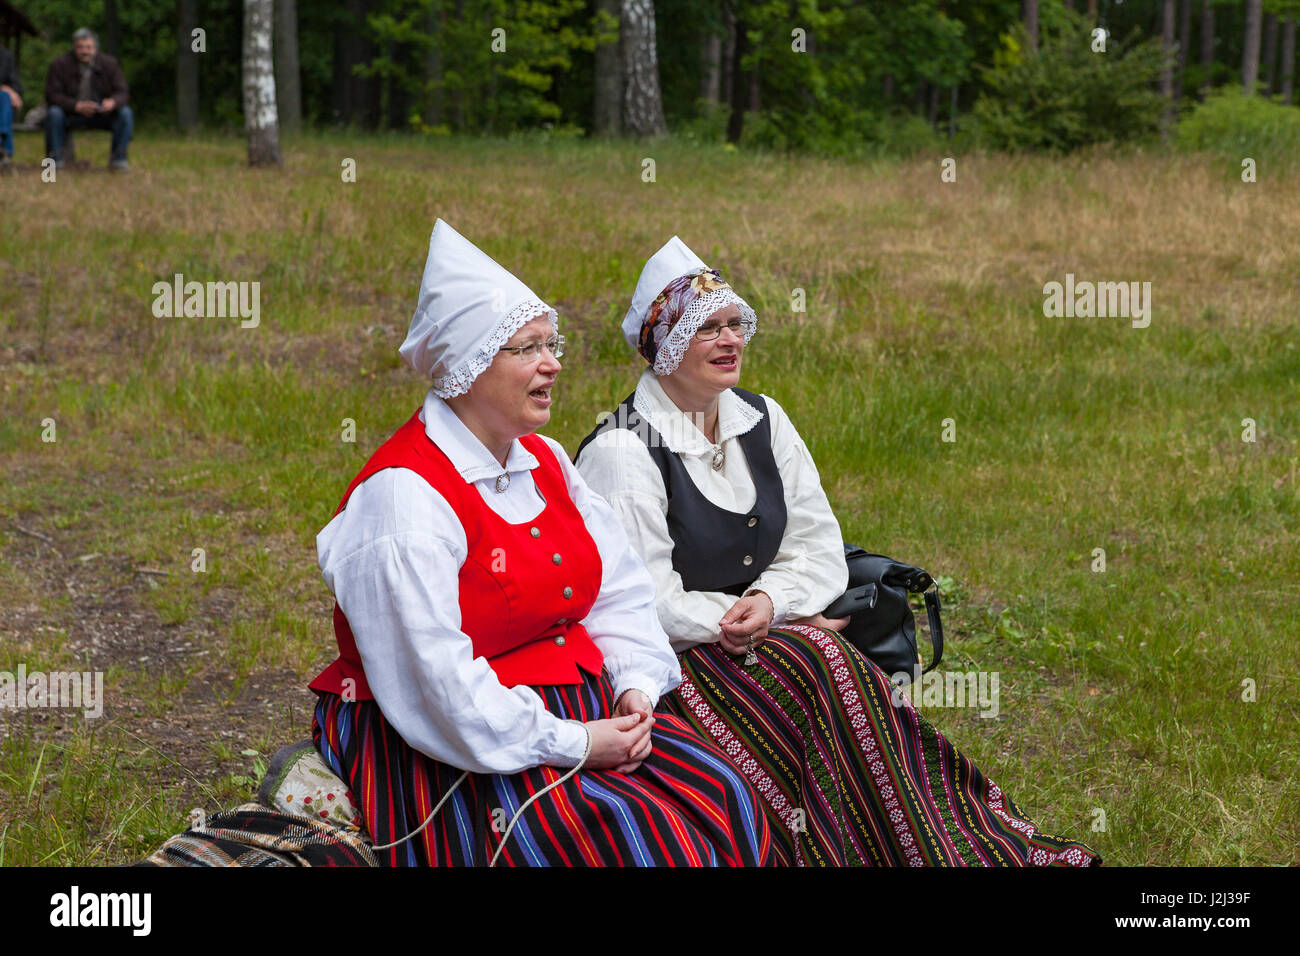 RIGA, LATVIA - 12 JUN 2016: Latvians in the national costumes at the cultucal event. Latvian Ethnographic Museum. Stock Photo